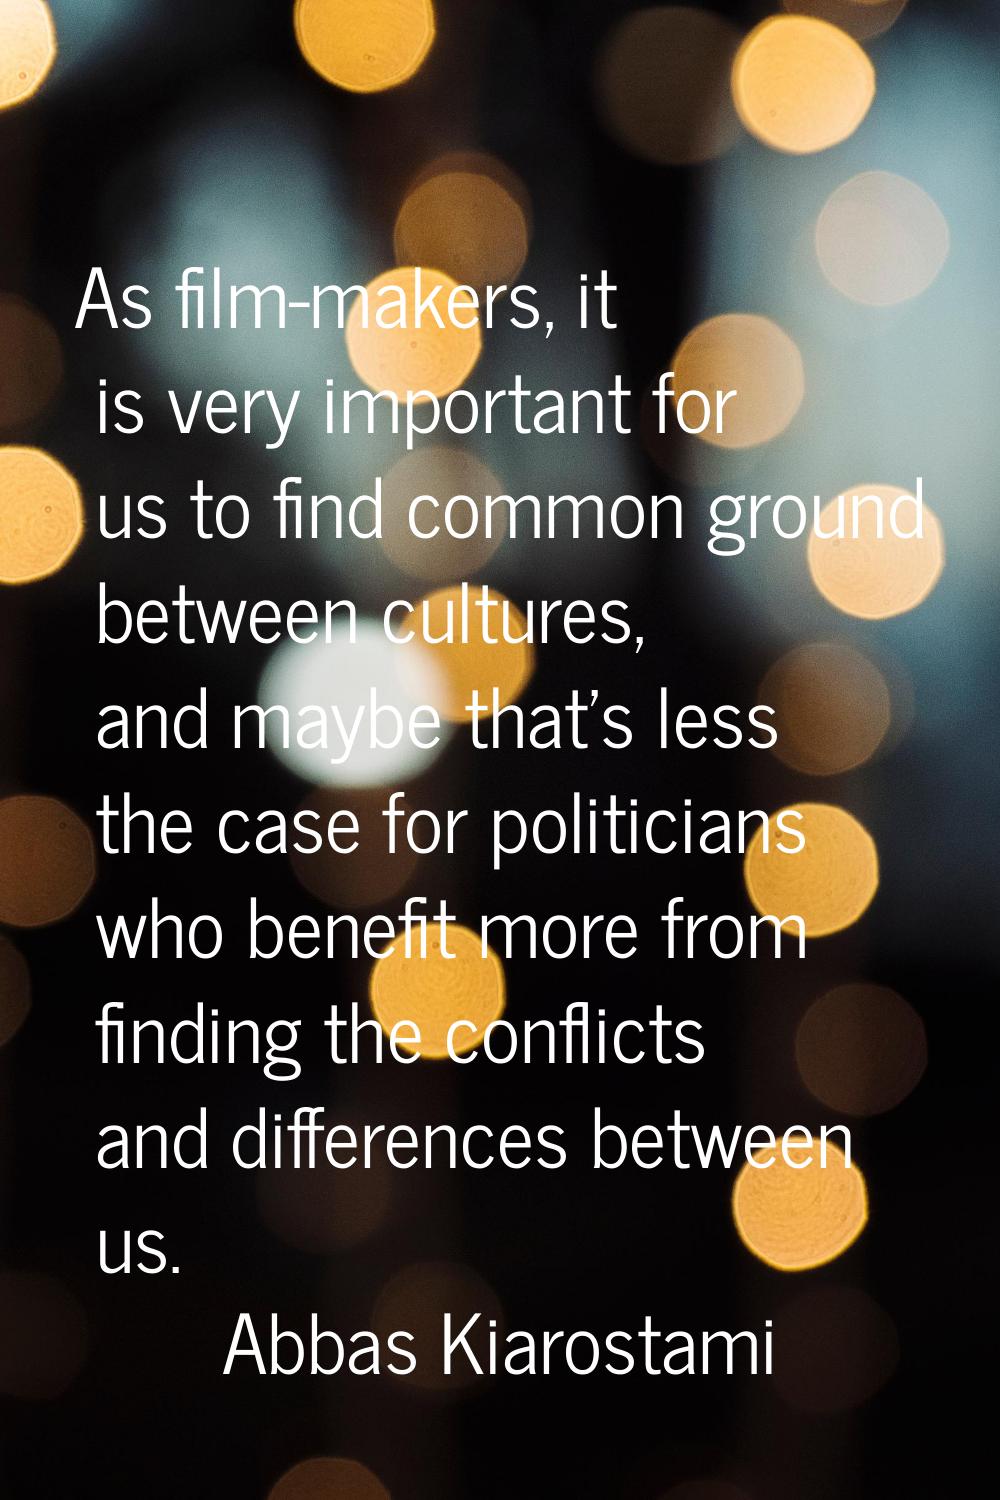 As film-makers, it is very important for us to find common ground between cultures, and maybe that'